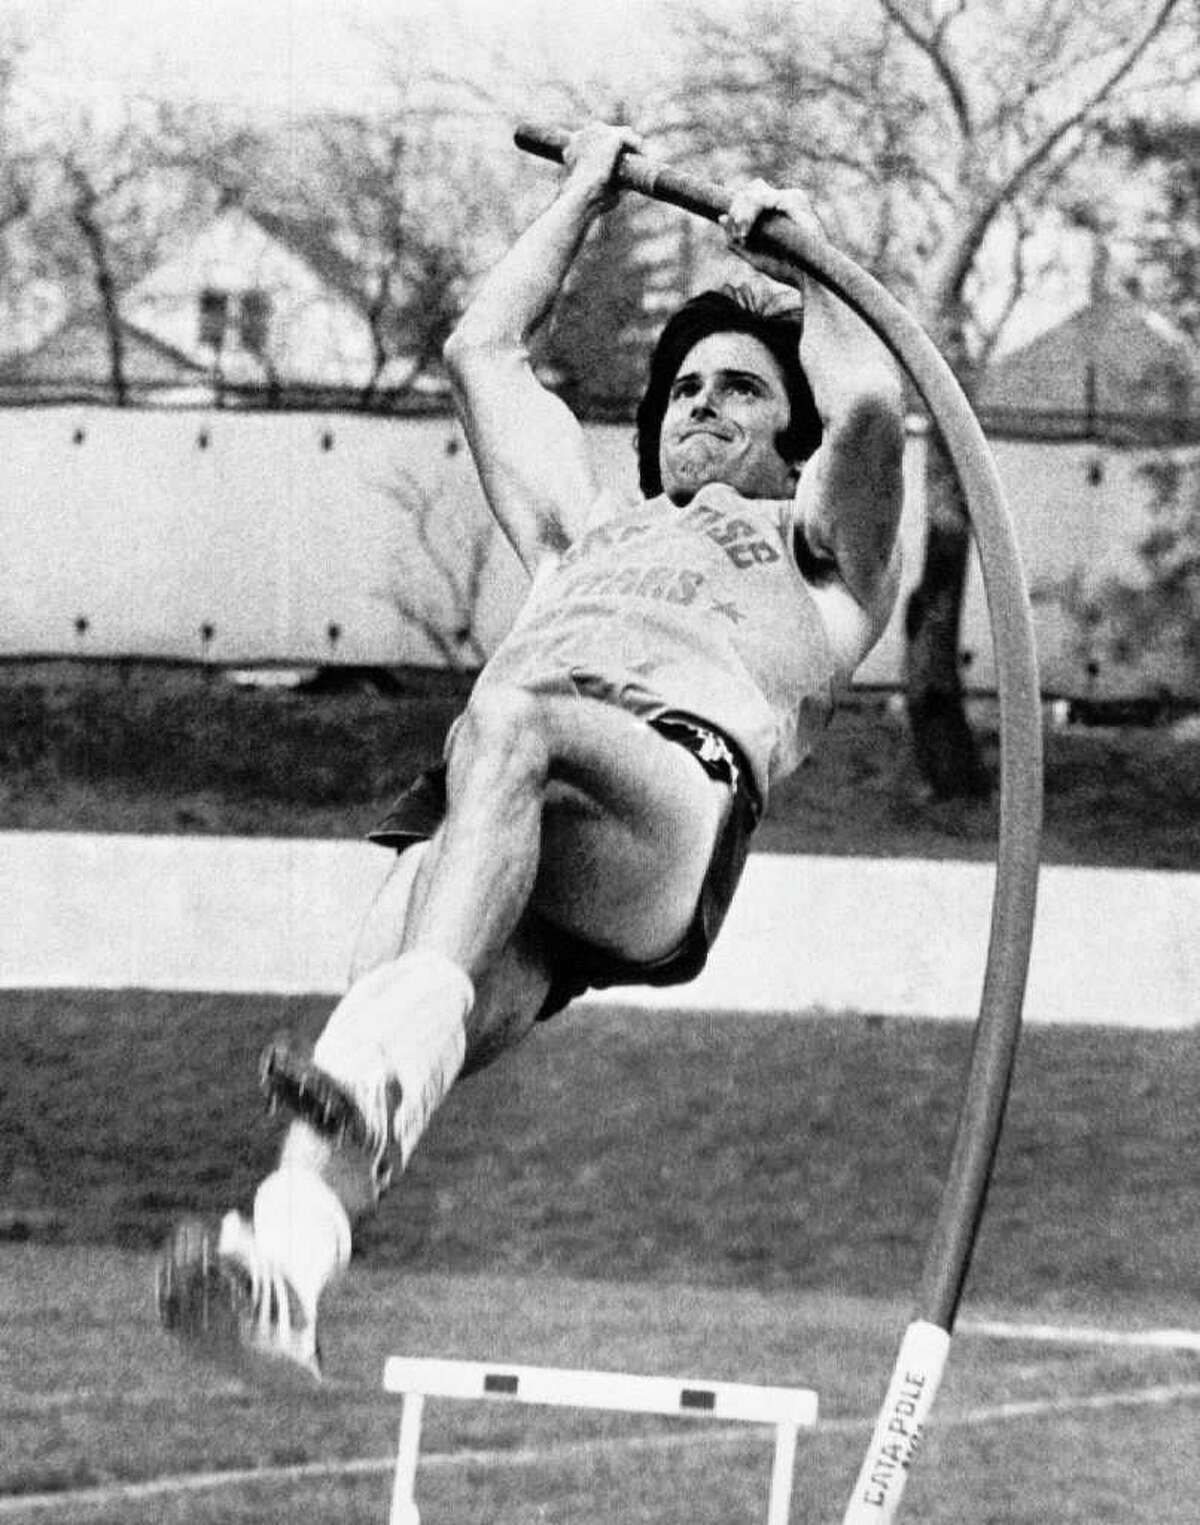 Caitlyn Jenner, then known as Bruce Jenner, starts her upward climb in the pole vault during the final day's competition on April 24, 1975 in the decathlon at the 66th drake relays in Des Moines, Iowa.